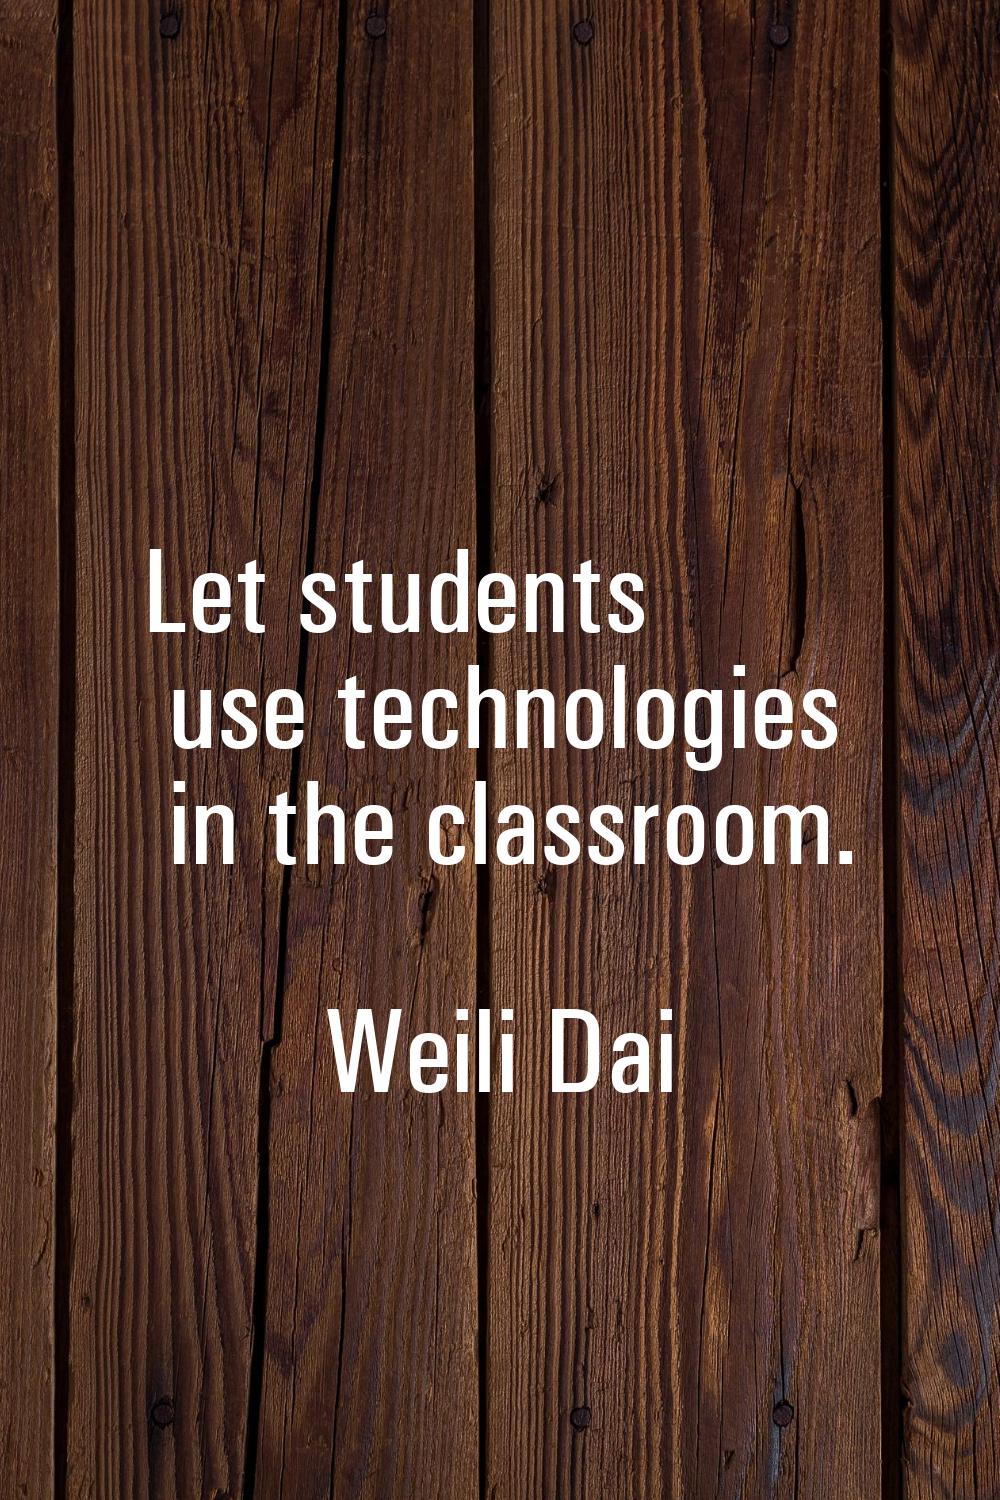 Let students use technologies in the classroom.